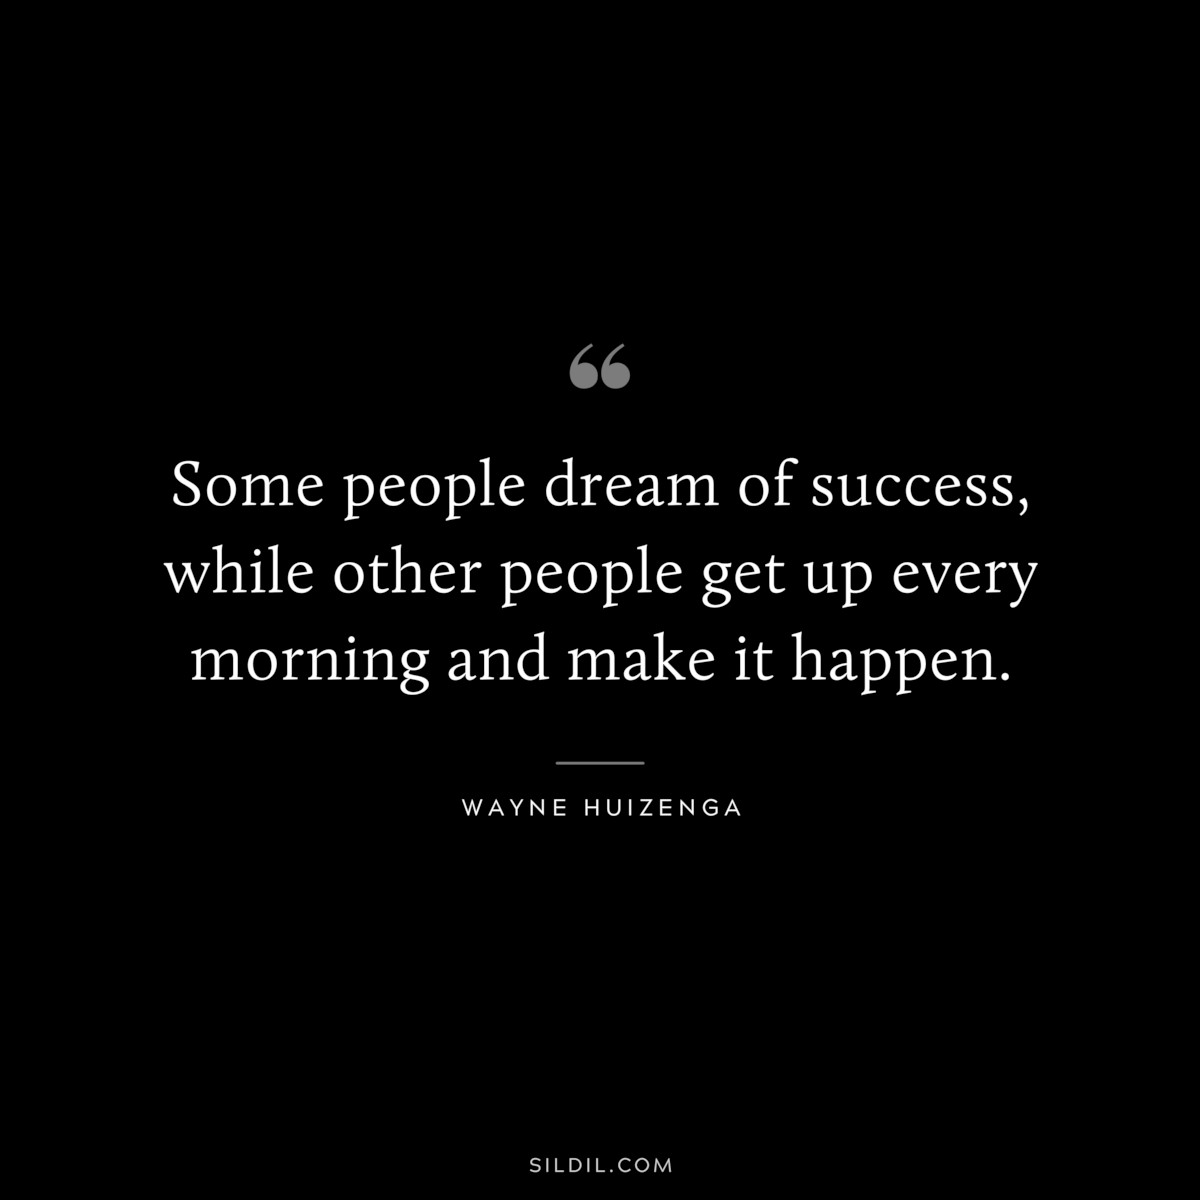 Some people dream of success, while other people get up every morning and make it happen. ― Wayne Huizenga